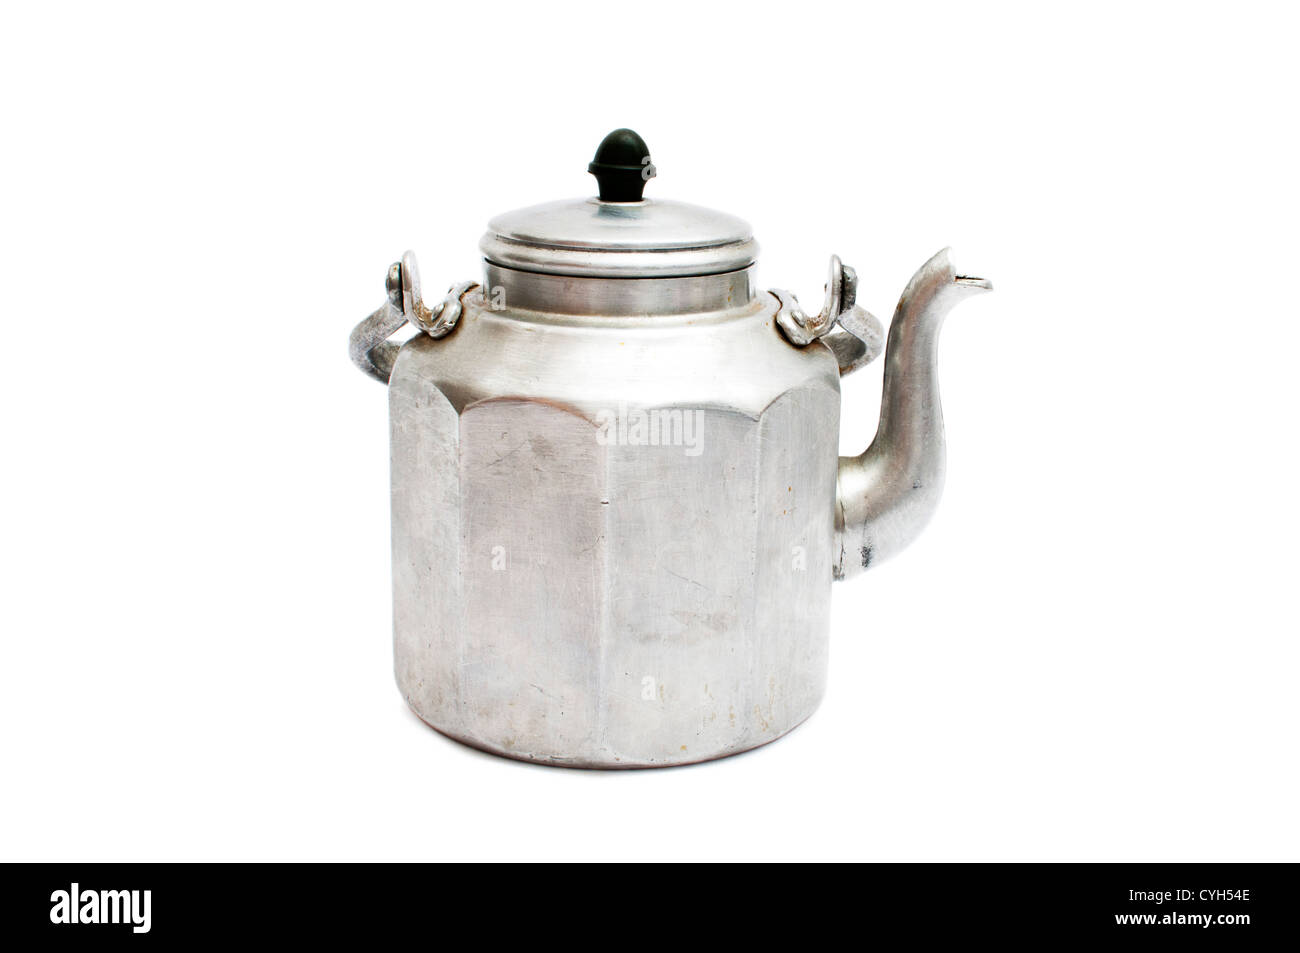 https://c8.alamy.com/comp/CYH54E/old-teapot-isolated-on-white-background-CYH54E.jpg